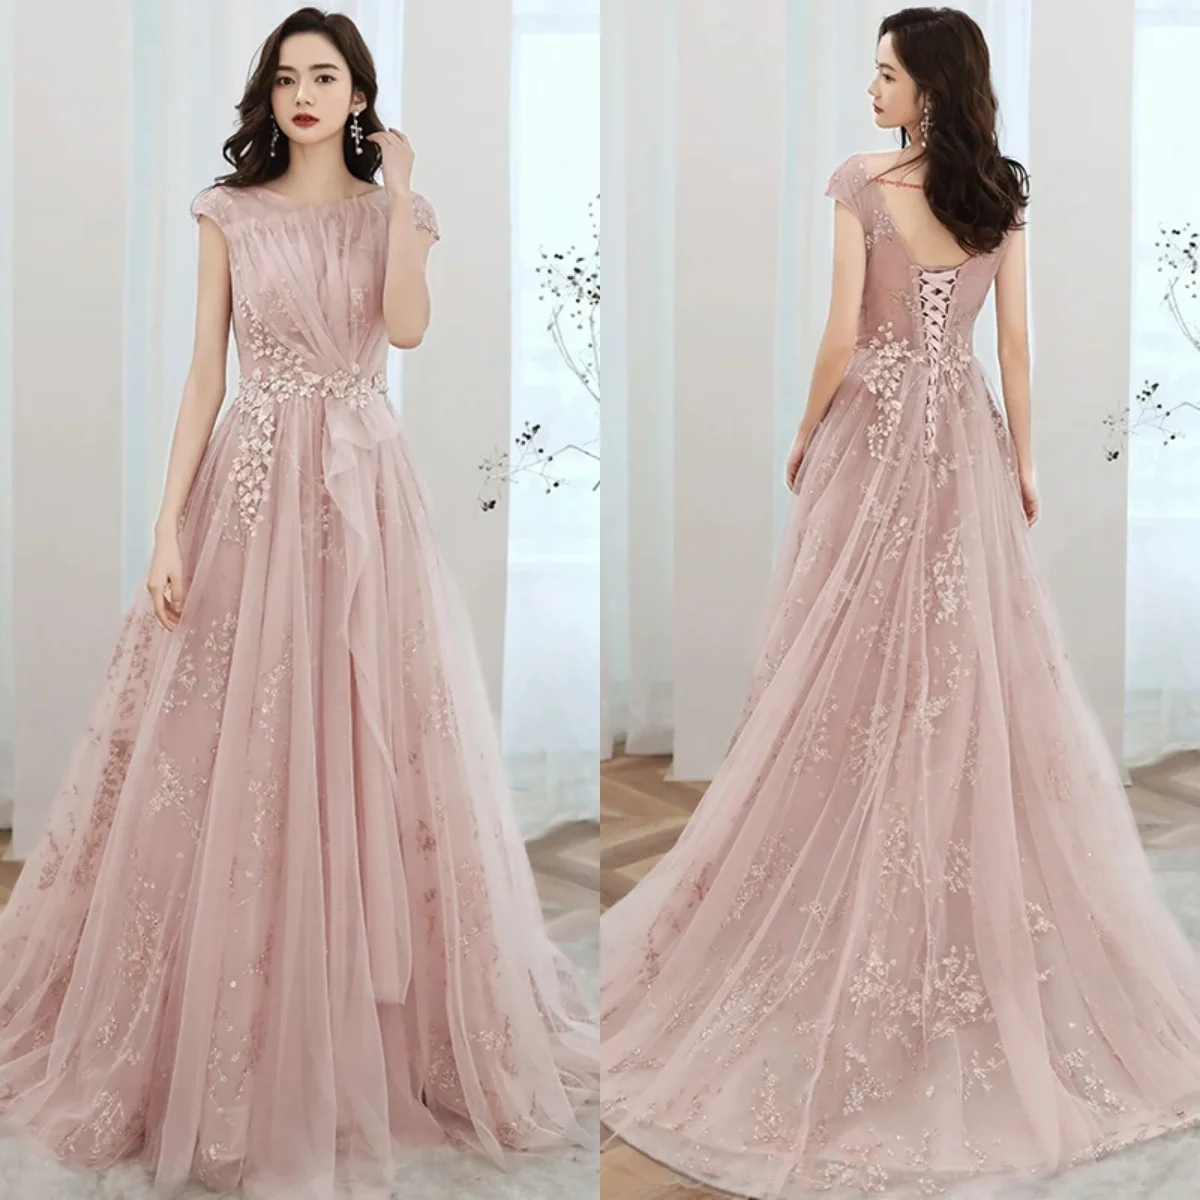 

Evening Dresses Pink Golden Glitters Illusion Pleat O-neck Short Sleeves A-line Floor-length Plus size Women Party Formal Gowns